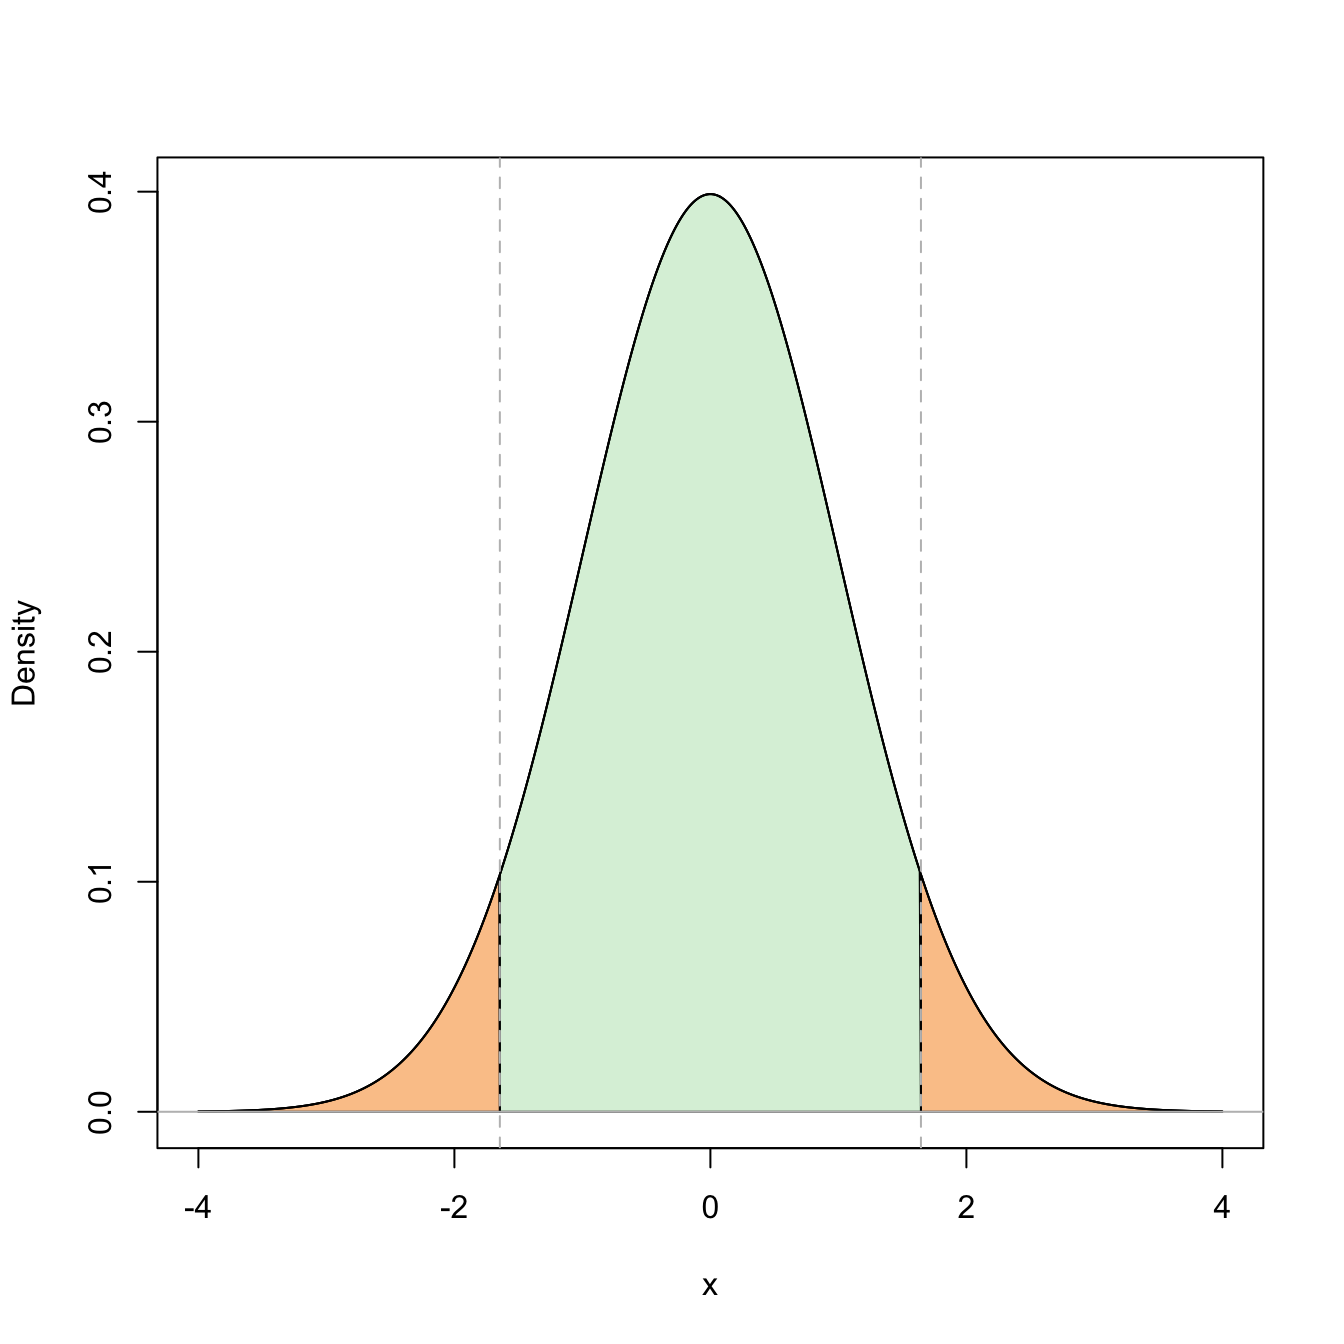 Graphical representation of the probabilities \(\mathbb{P}(Z\leq z_{\alpha/2})=1-\alpha\) and \(\mathbb{P}(-z_{\alpha/2}\leq Z\leq z_{\alpha/2})=1-\alpha\) (in green) and their complementaries (in orange) for \(\alpha=0.10\).